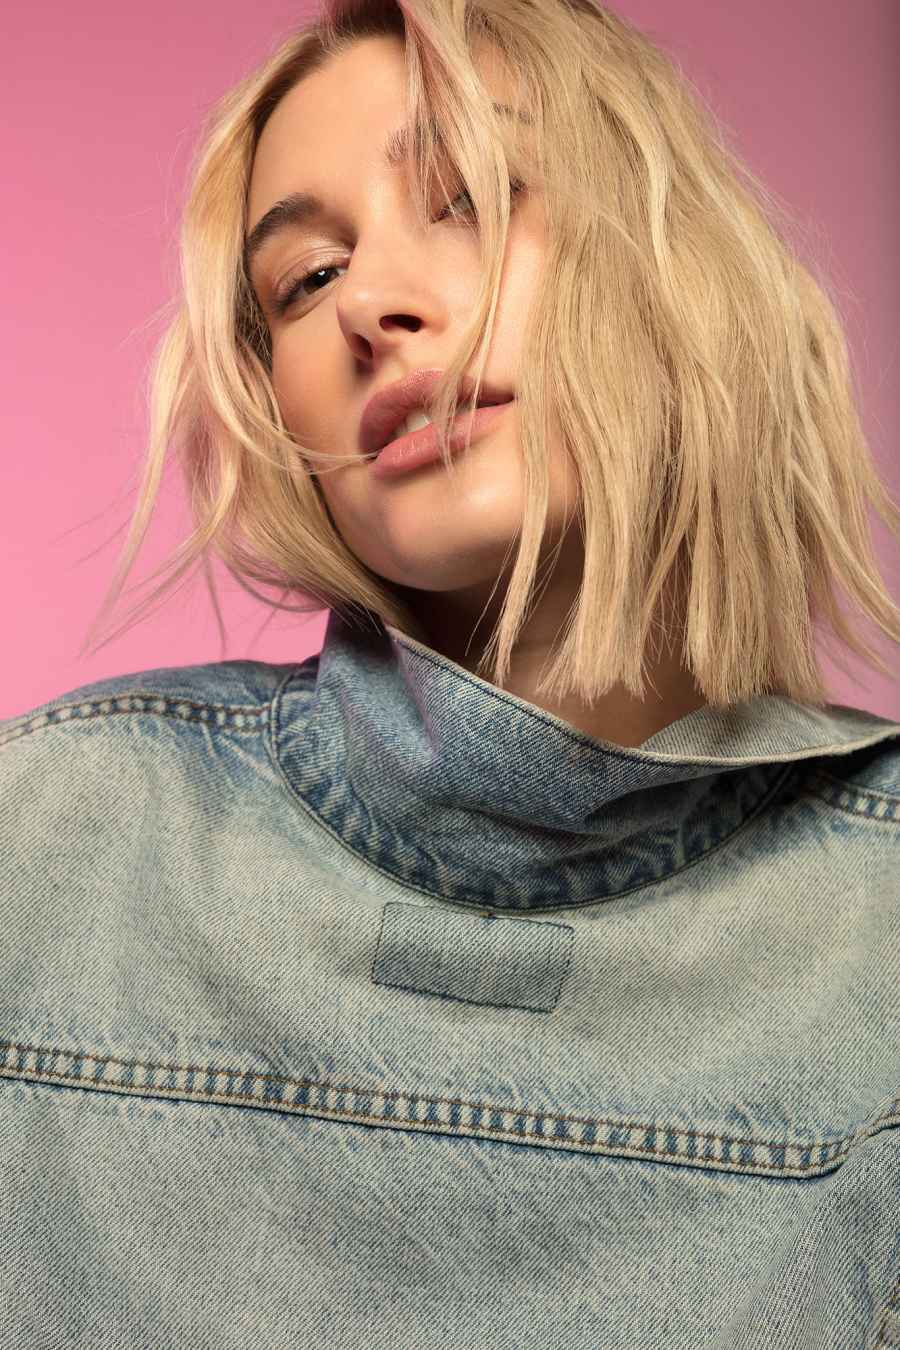 Hailey Baldwin Is the First Face of Levi’s 501 Denim and the Campaign Is Perfect for Festival Season